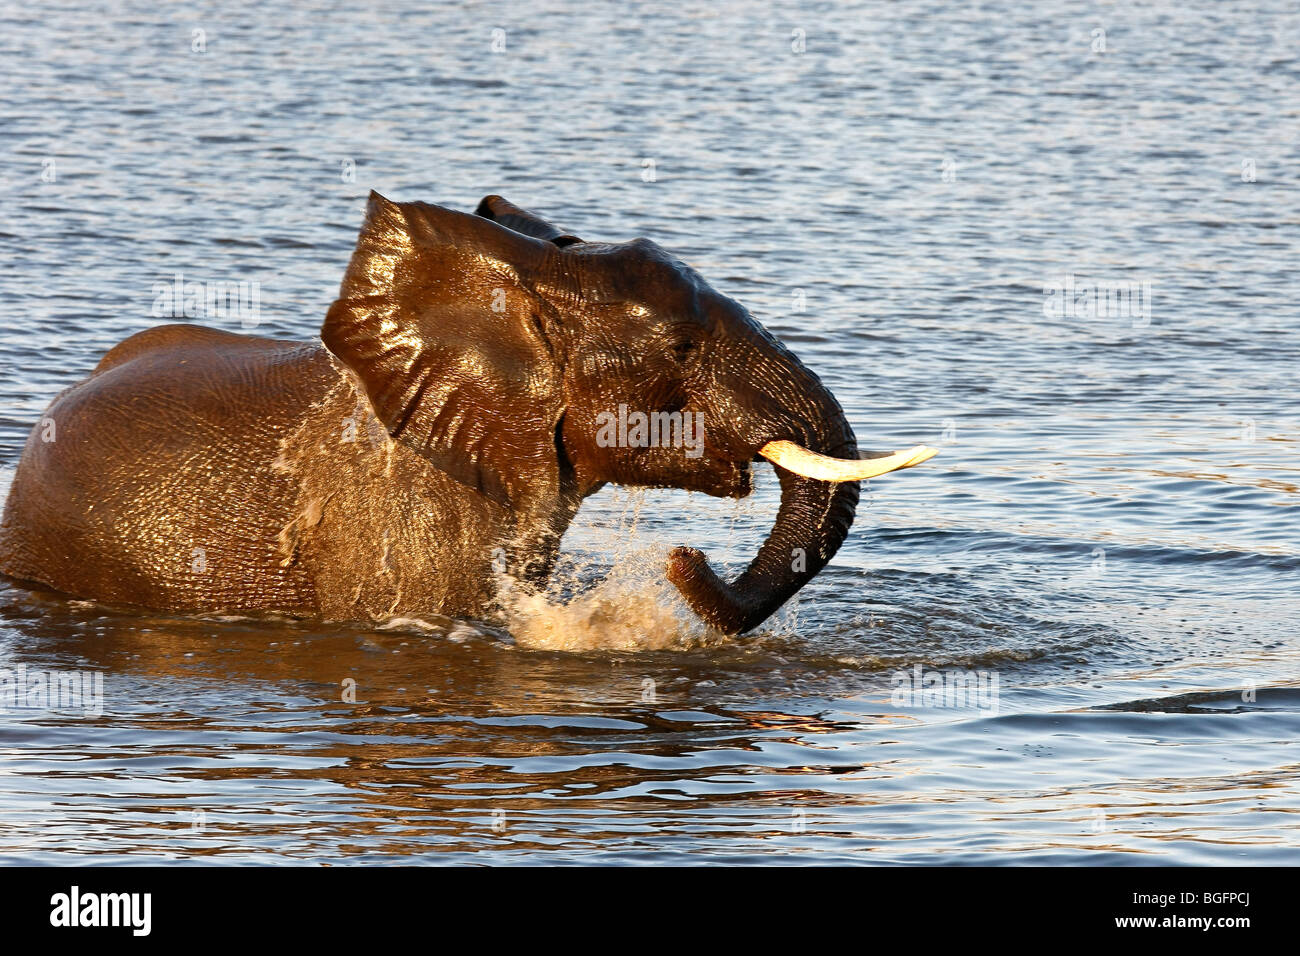 Elephant Swimming in late afternoon light Stock Photo